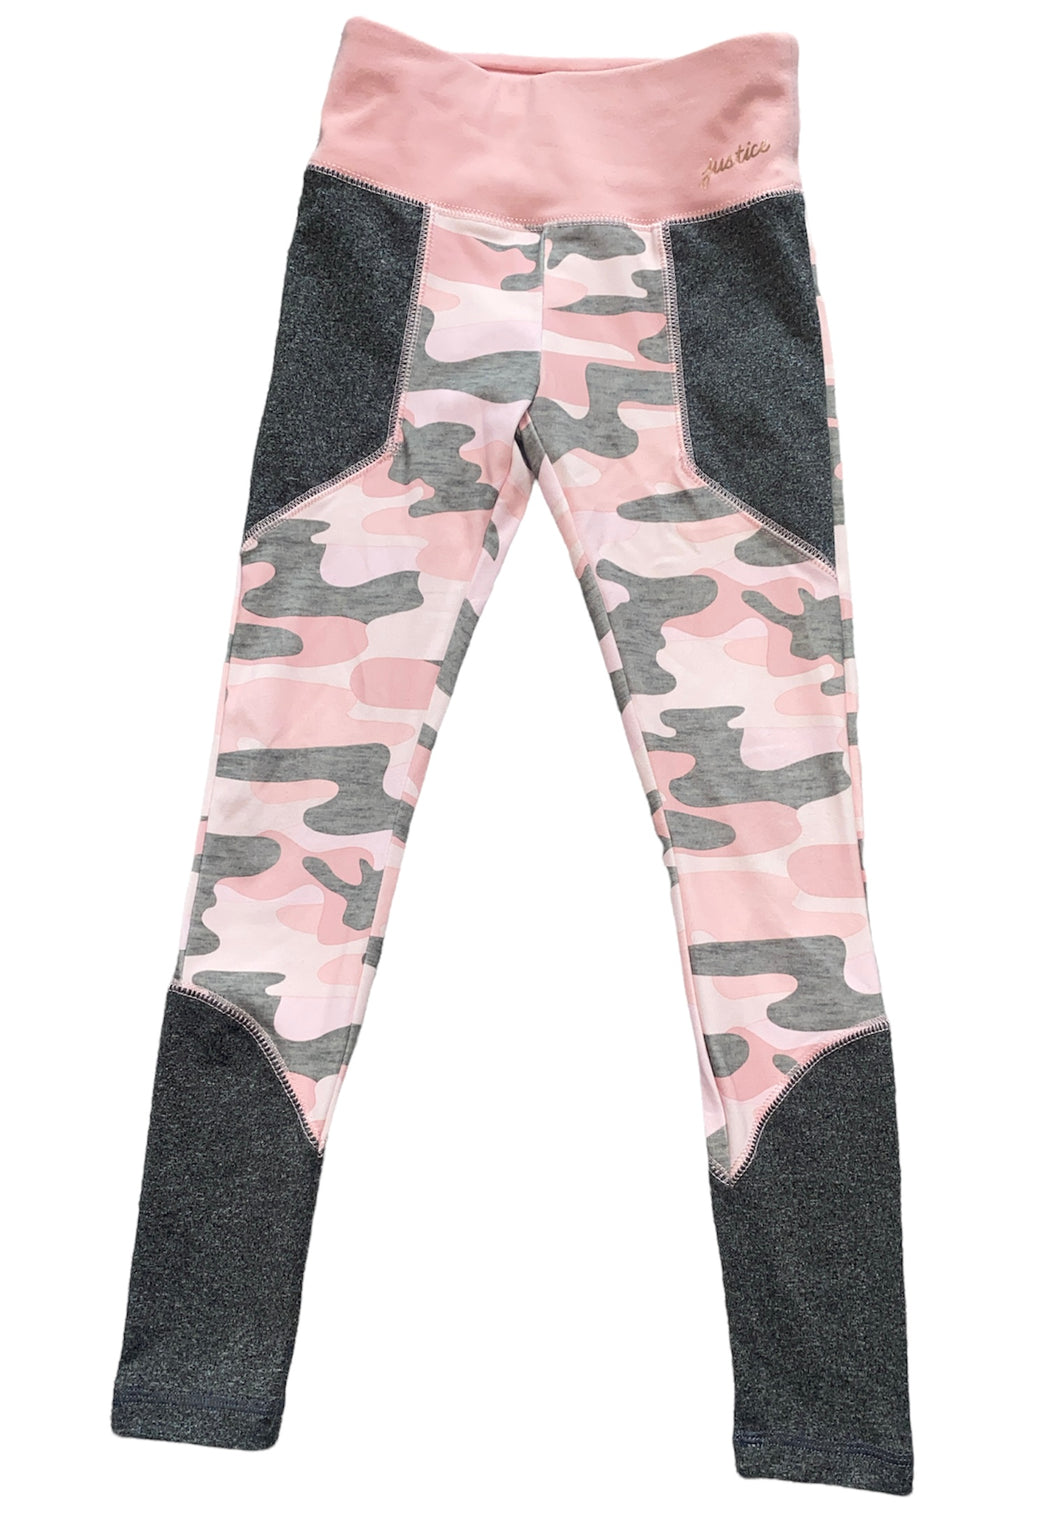 Justice girls active color block camouflage leggings 6-7